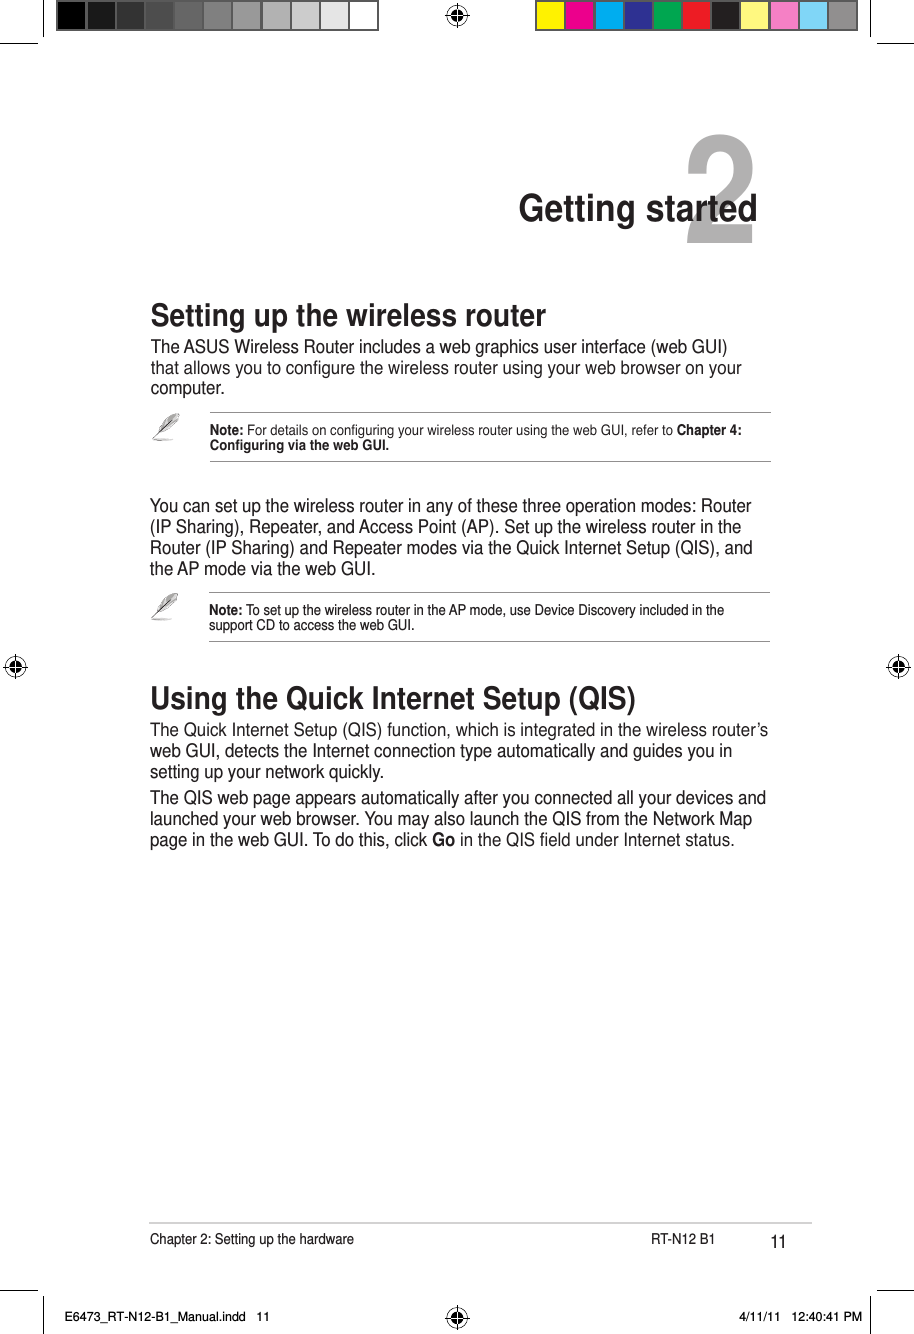 11Chapter 2: Setting up the hardware                     RT-N12 B12Getting startedSetting up the wireless routerThe ASUS Wireless Router includes a web graphics user interface (web GUI) that allows you to congure the wireless router using your web browser on your computer.You can set up the wireless router in any of these three operation modes: Router (IP Sharing), Repeater, and Access Point (AP). Set up the wireless router in the Router (IP Sharing) and Repeater modes via the Quick Internet Setup (QIS), and the AP mode via the web GUI.Note: For details on conguring your wireless router using the web GUI, refer to Chapter 4: Conguring via the web GUI.Note: To set up the wireless router in the AP mode, use Device Discovery included in the support CD to access the web GUI.Using the Quick Internet Setup (QIS)The Quick Internet Setup (QIS) function, which is integrated in the wireless router’s web GUI, detects the Internet connection type automatically and guides you in setting up your network quickly.The QIS web page appears automatically after you connected all your devices and launched your web browser. You may also launch the QIS from the Network Map page in the web GUI. To do this, click Go in the QIS eld under Internet status.E6473_RT-N12-B1_Manual.indd   11 4/11/11   12:40:41 PM